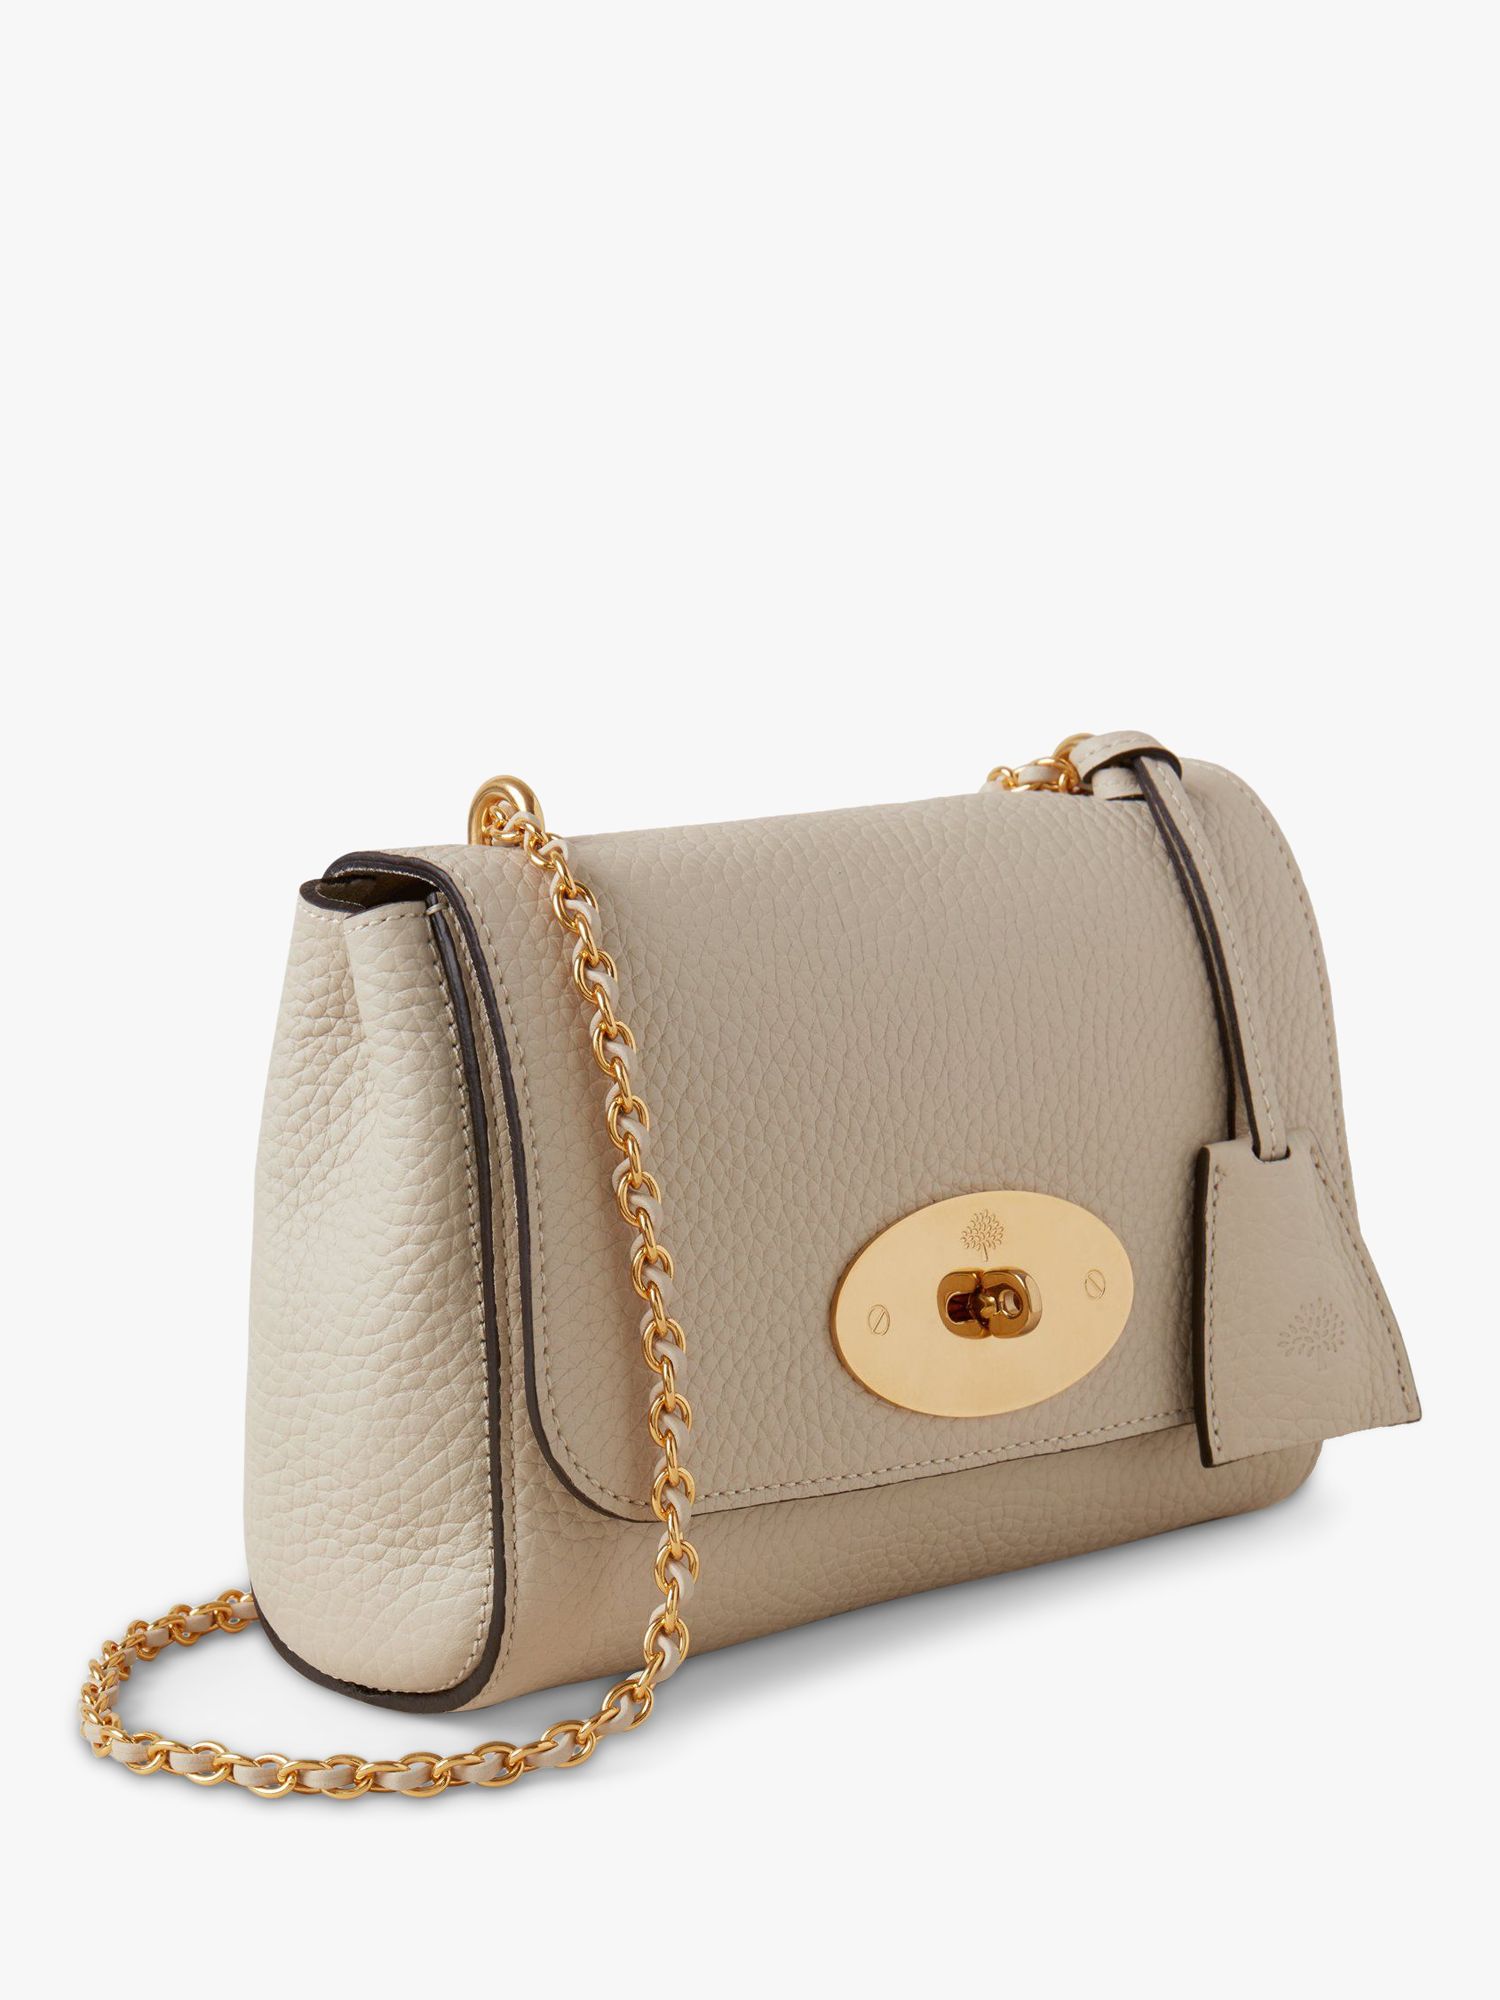 Mulberry Lily Heavy Grain Leather Shoulder Bag, Chalk at John Lewis ...